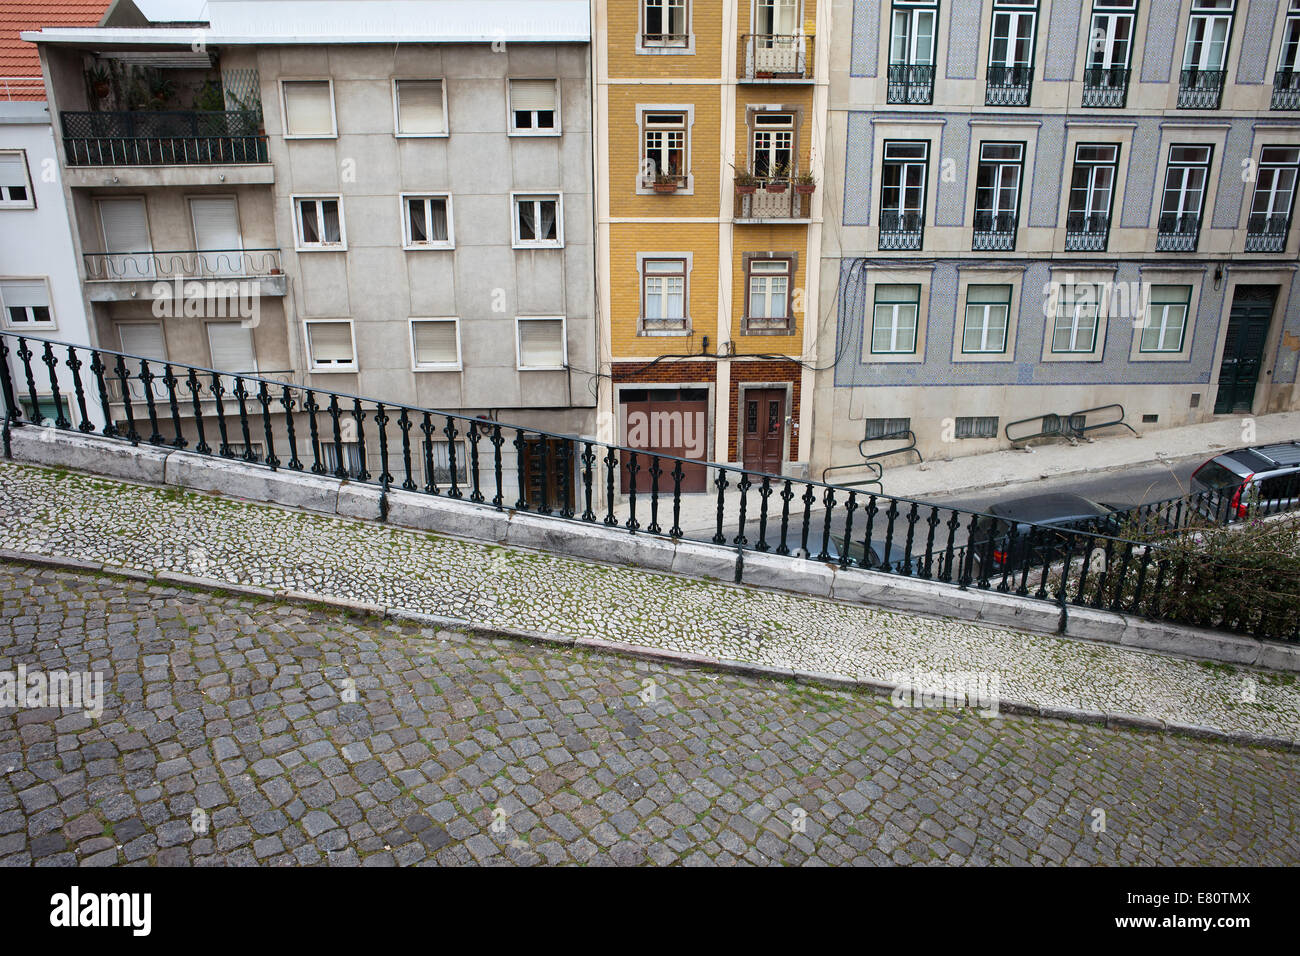 Descending, steep, cobbled street with sidewalk and houses in the background in Lisbon, Portugal. Stock Photo